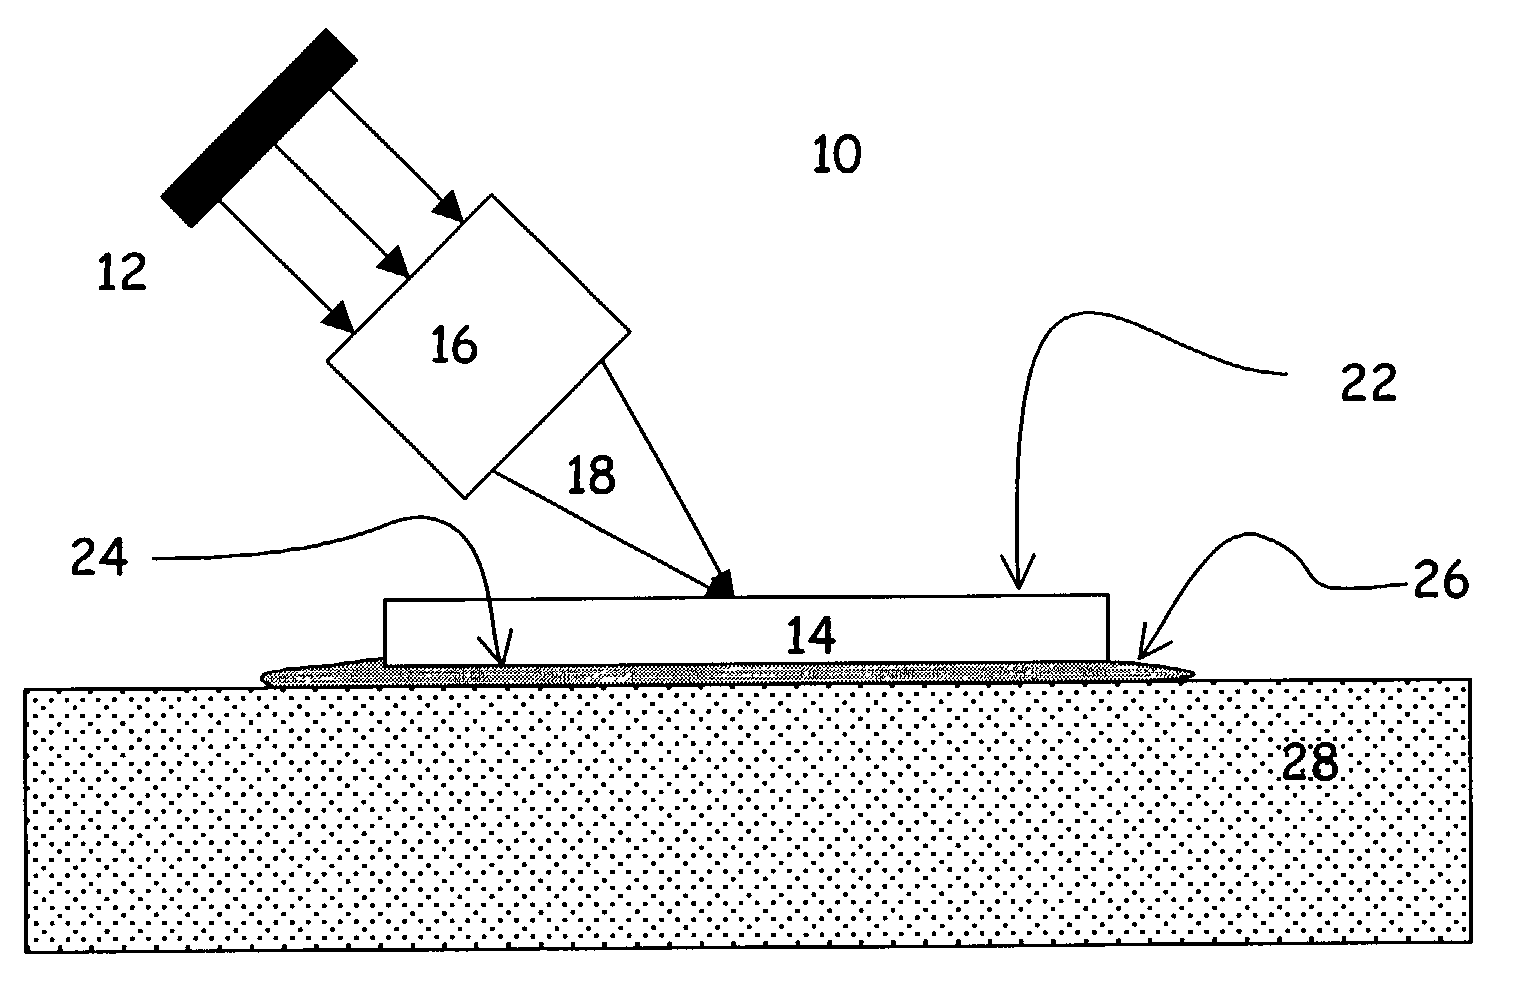 Thin disk laser with large numerical aperture pumping